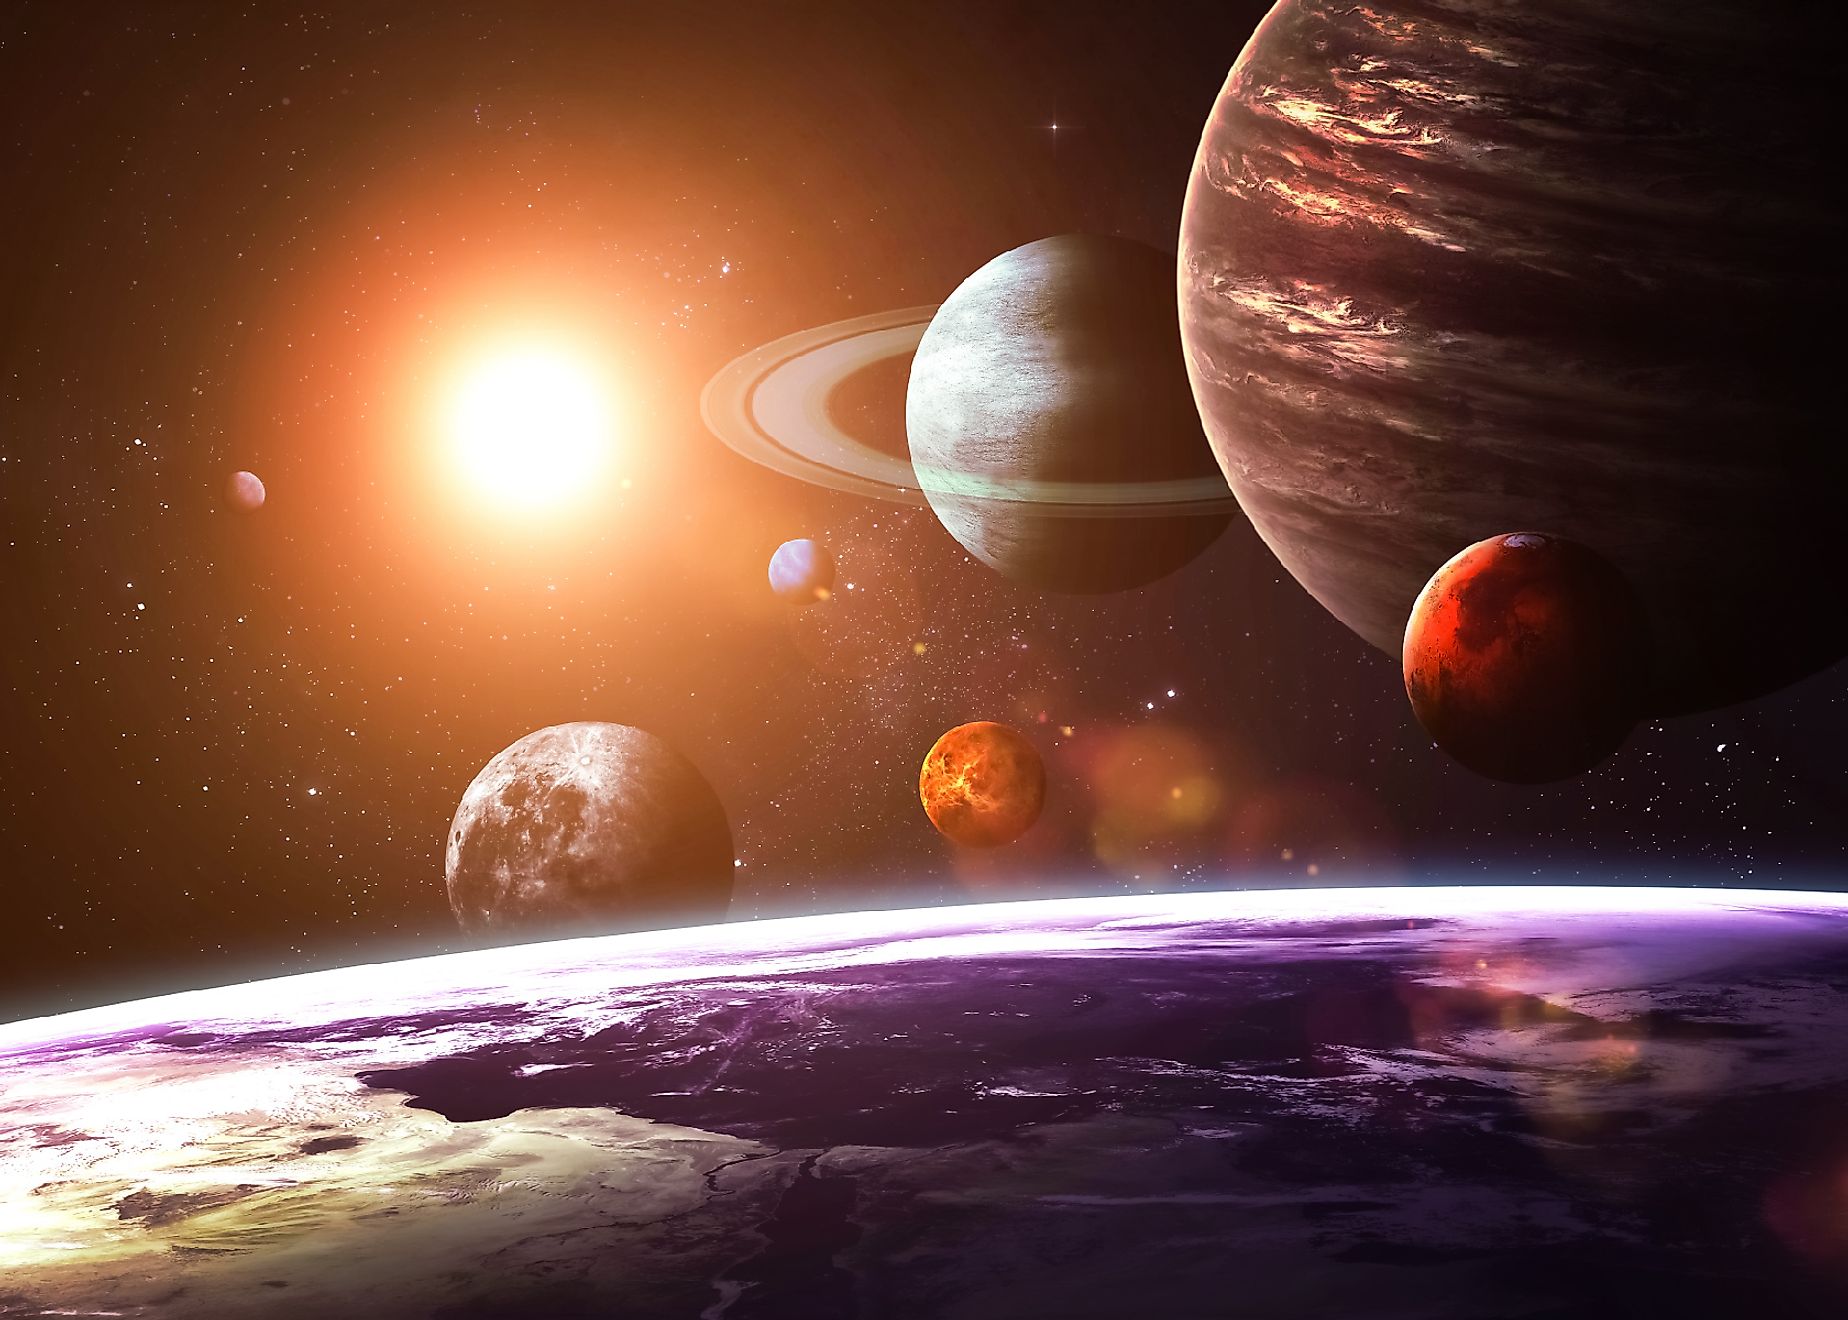 An Illustration of Our Solar System with Several Planets Showing